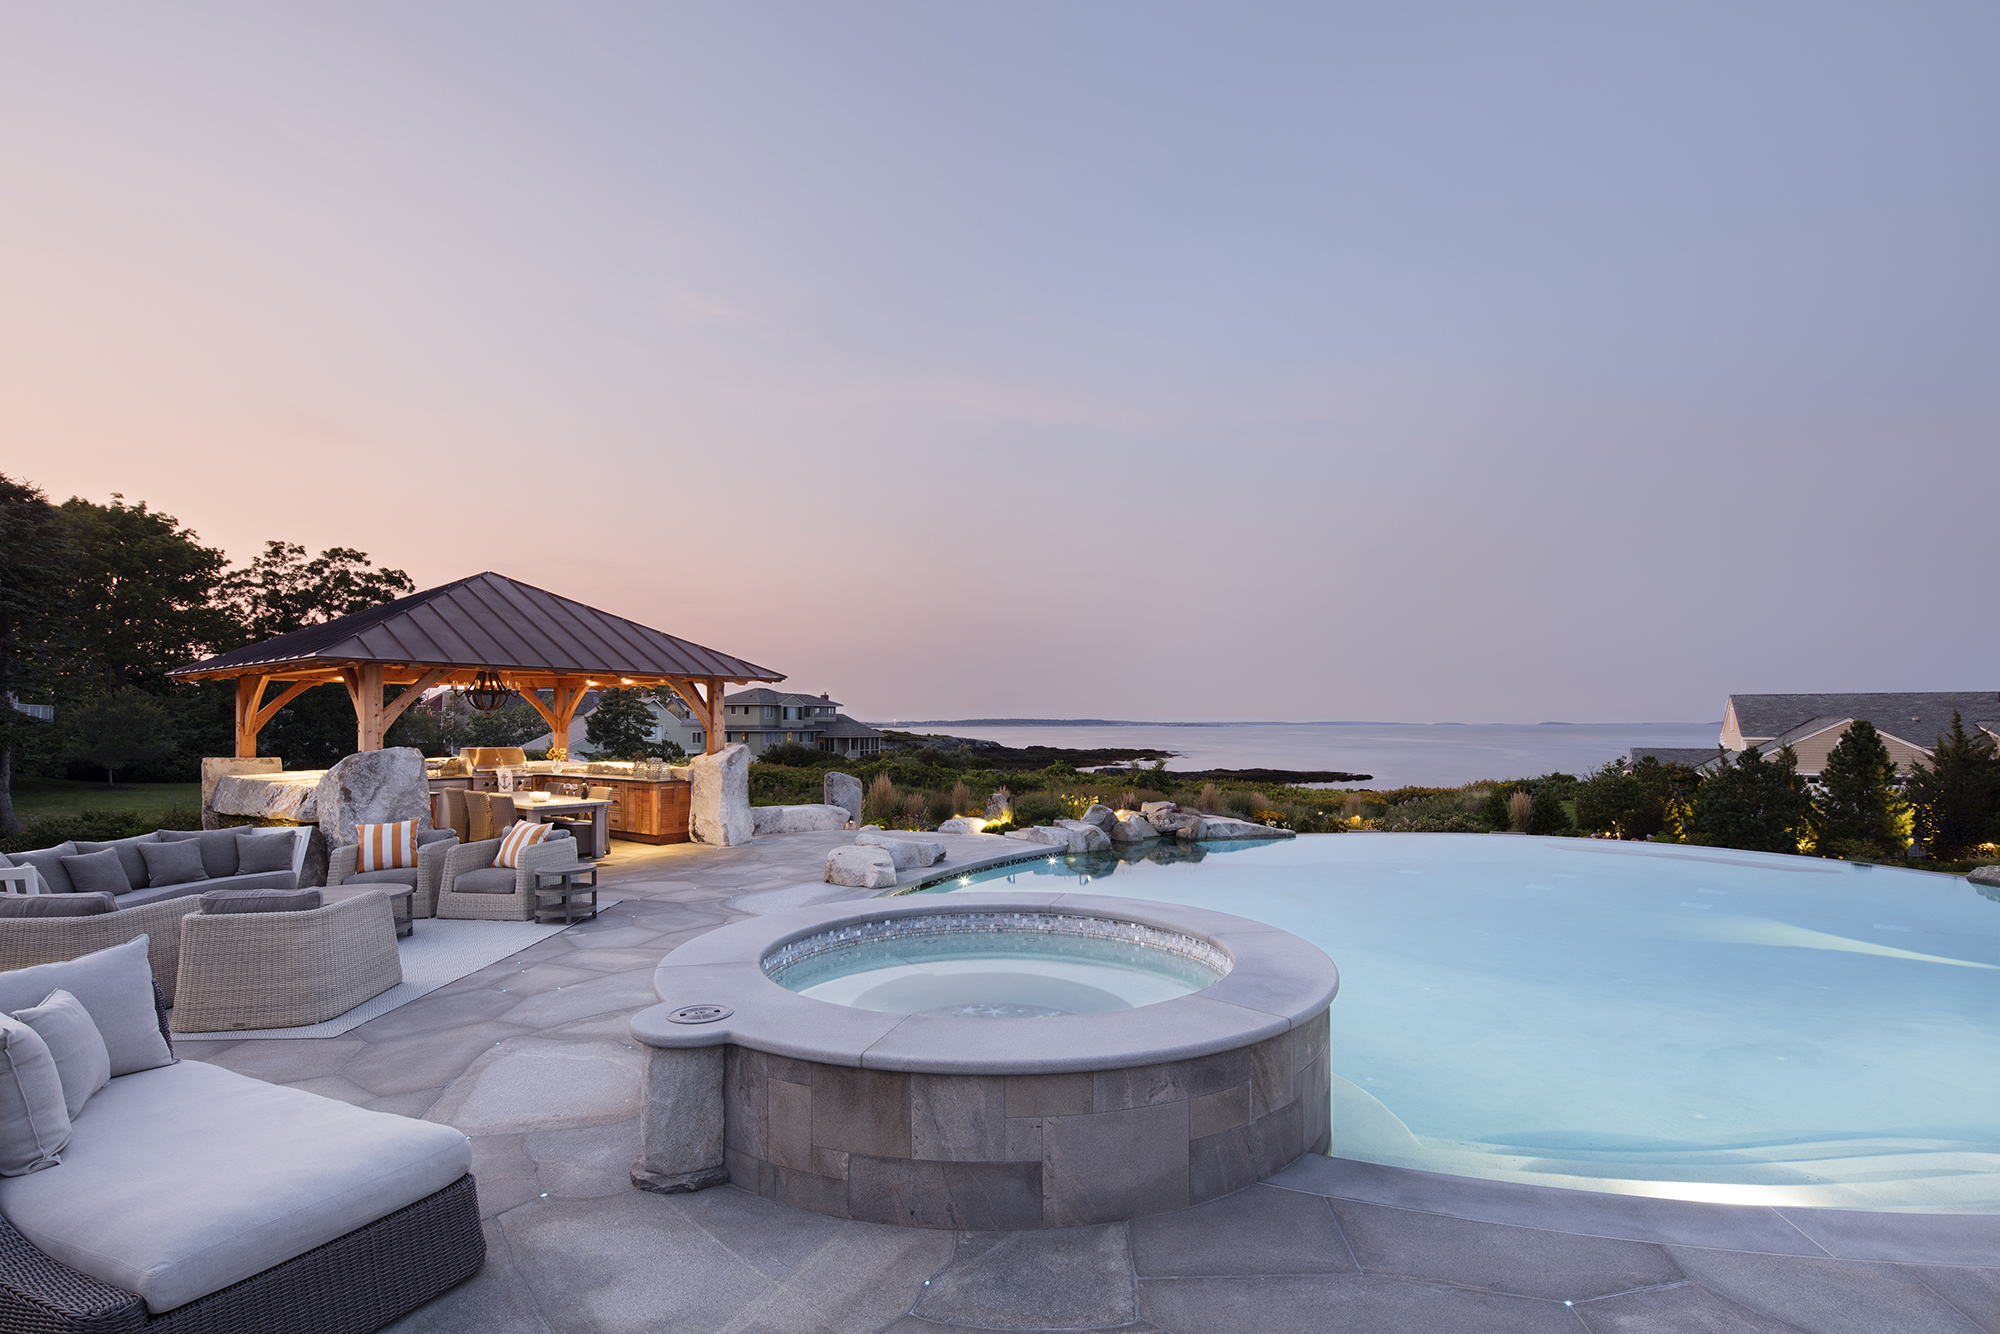 Hot tub and pool with view of coastal Maine.